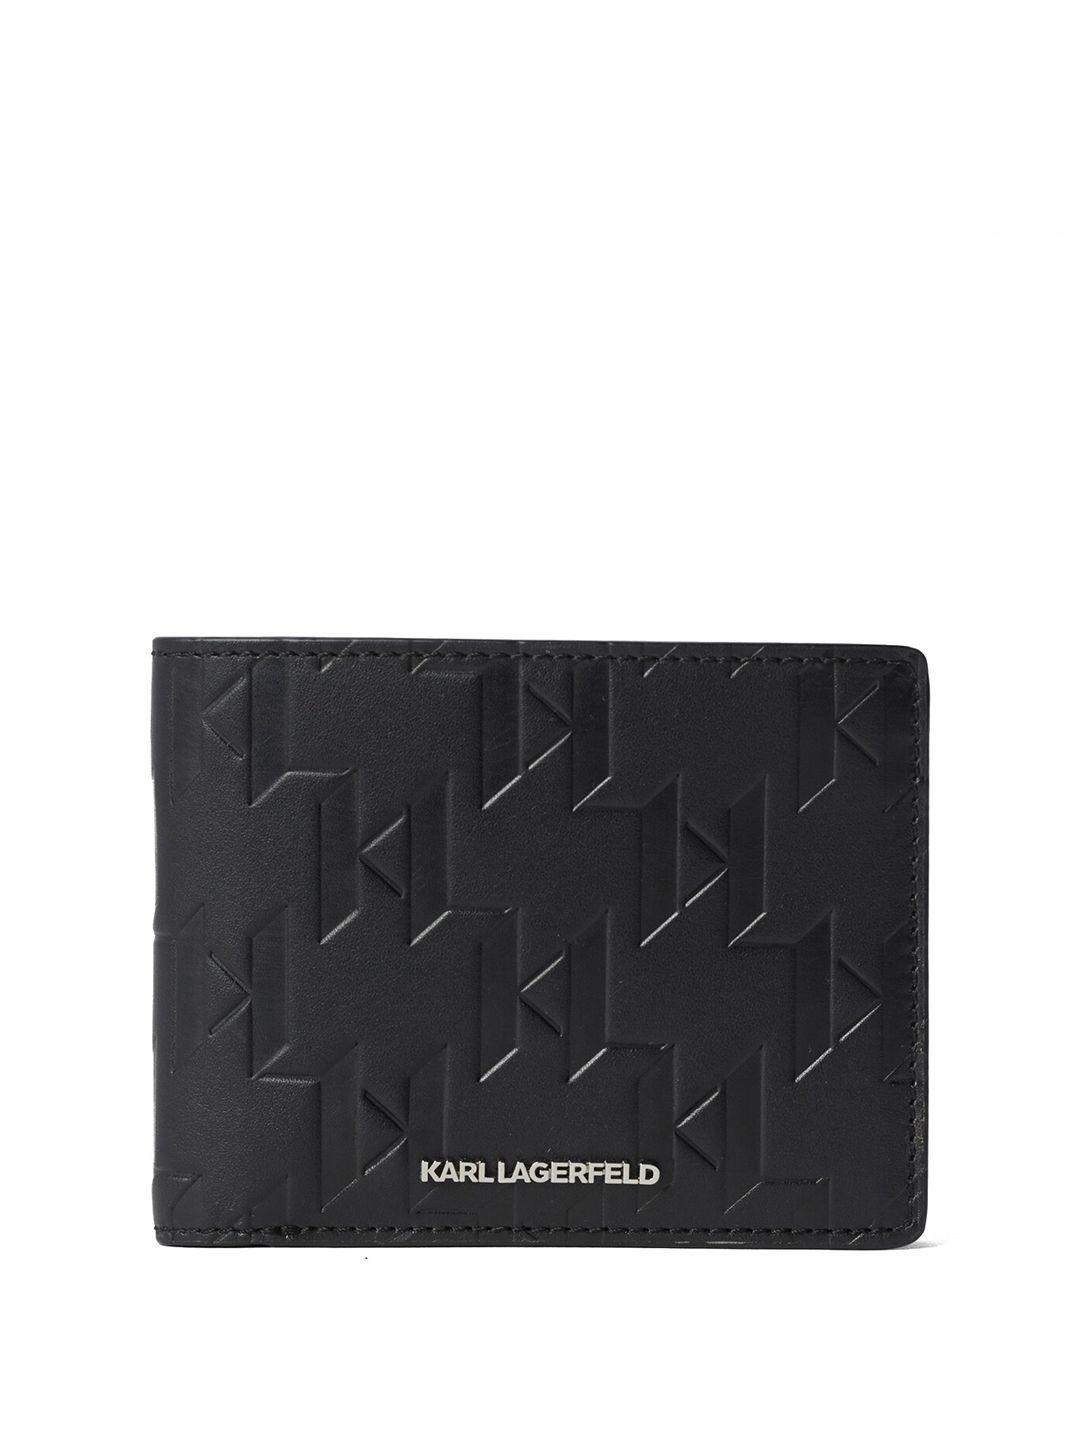 karl lagerfeld men textured leather two fold wallet